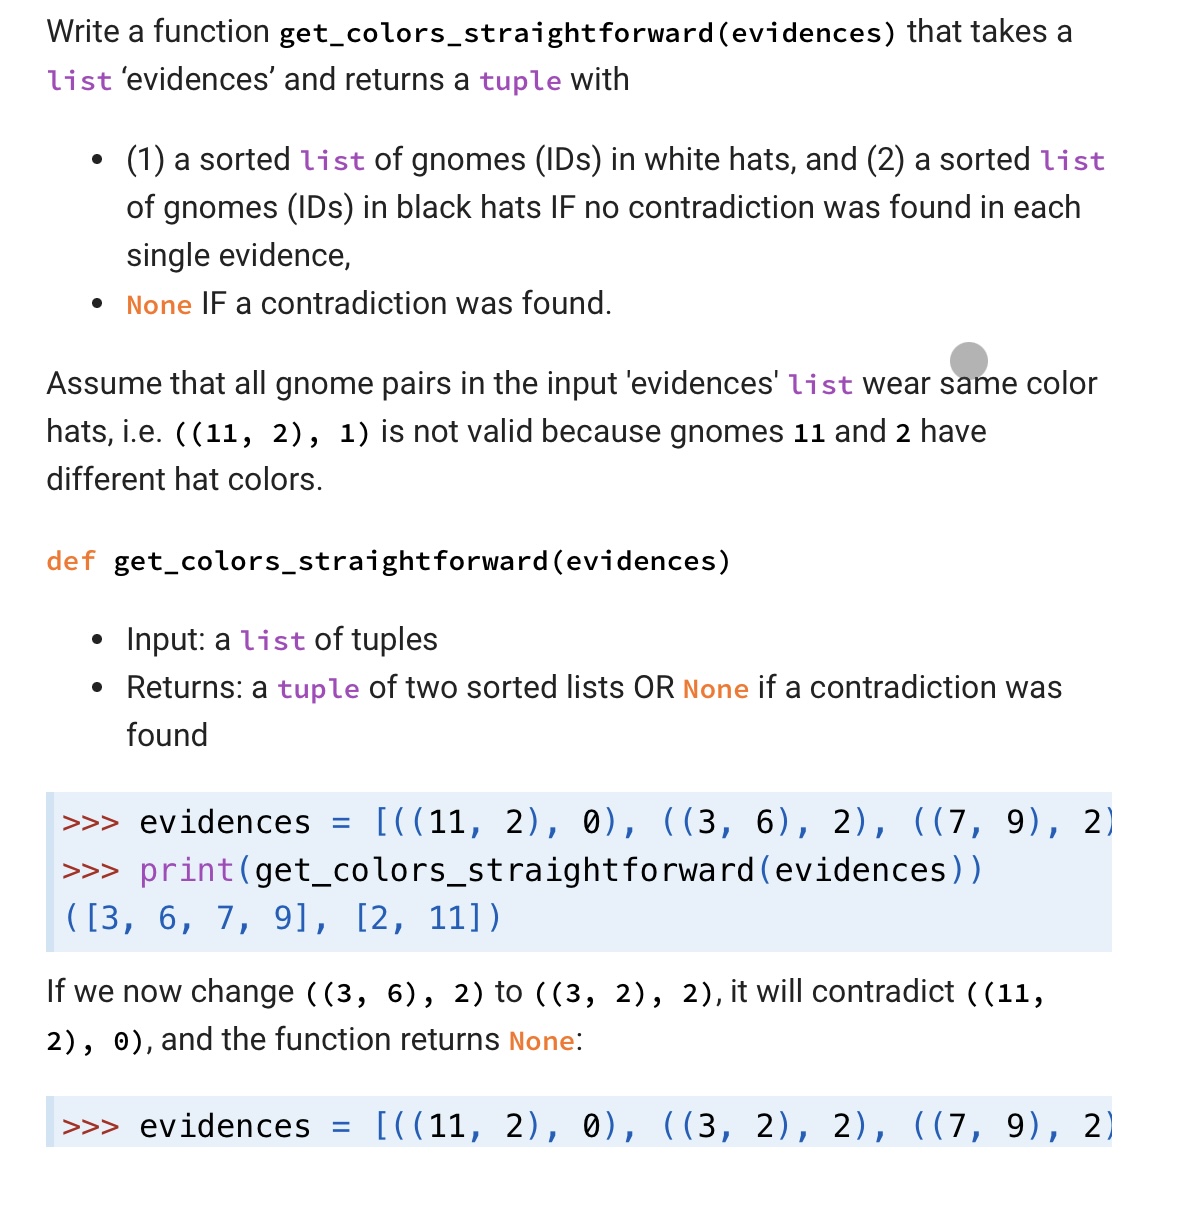 Write a function get_colors_straightforward (evidences) that takes a list 'evidences' and returns a tuple